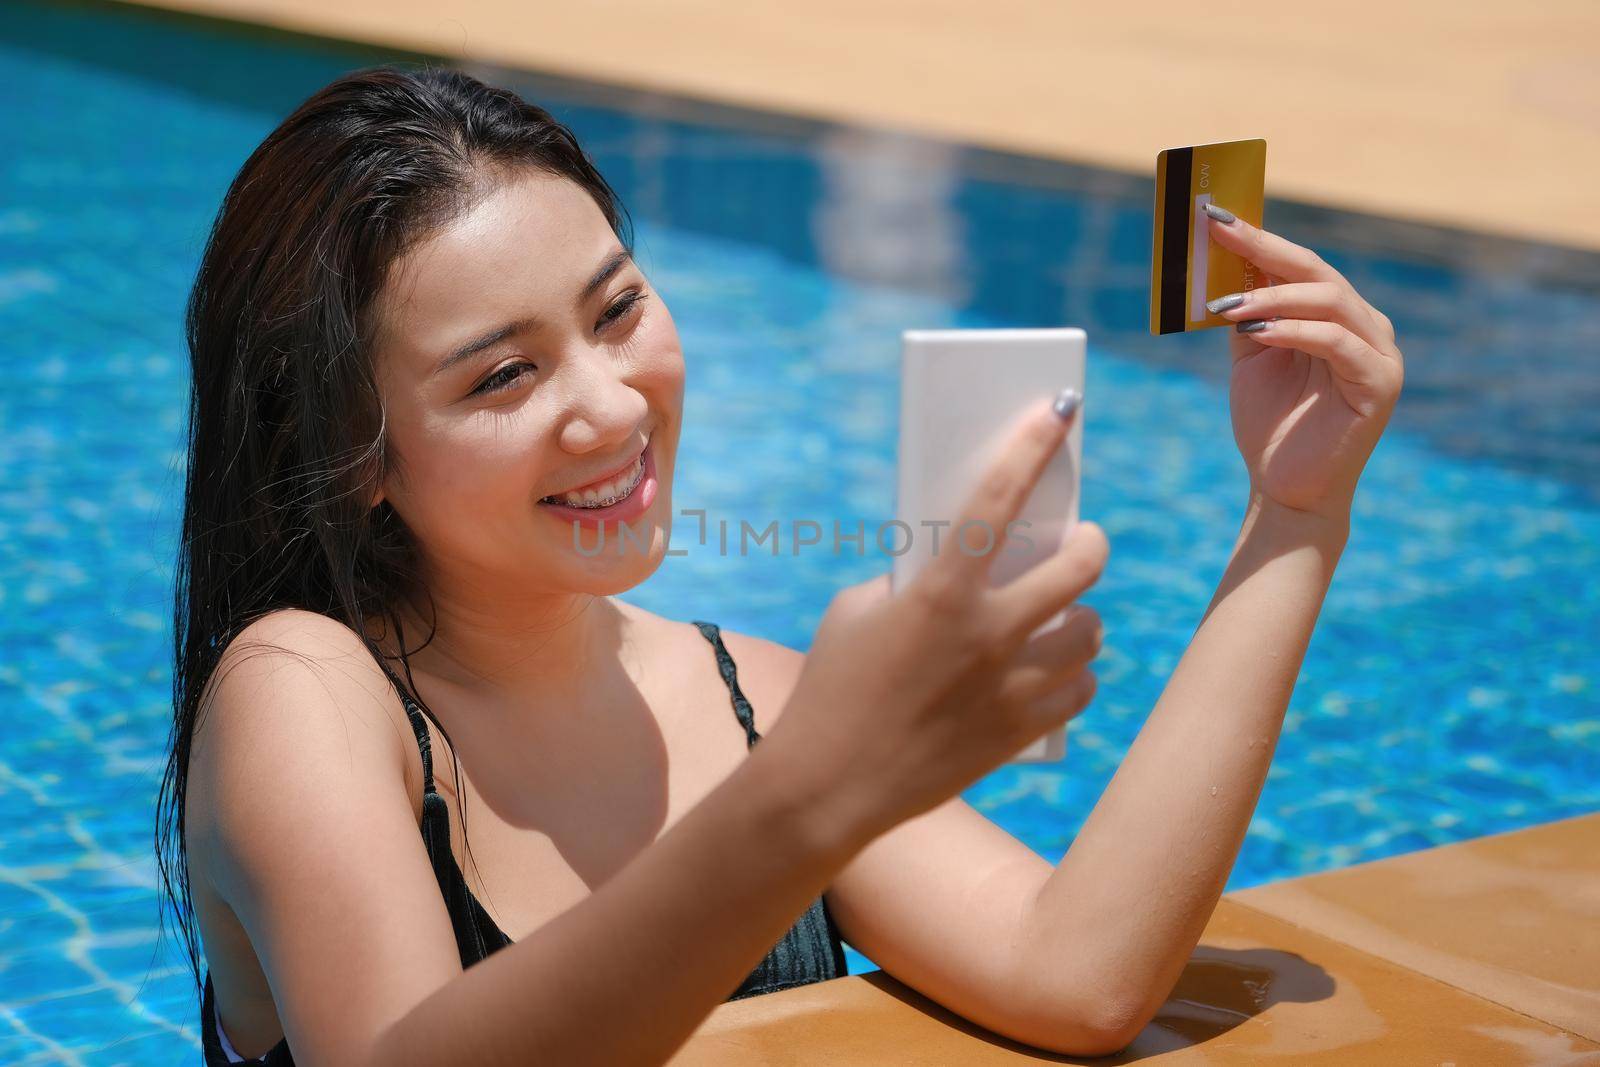 online payment, A teenage girl who swims is using her credit card with her phone to make purchases. online via internet.. by Manastrong